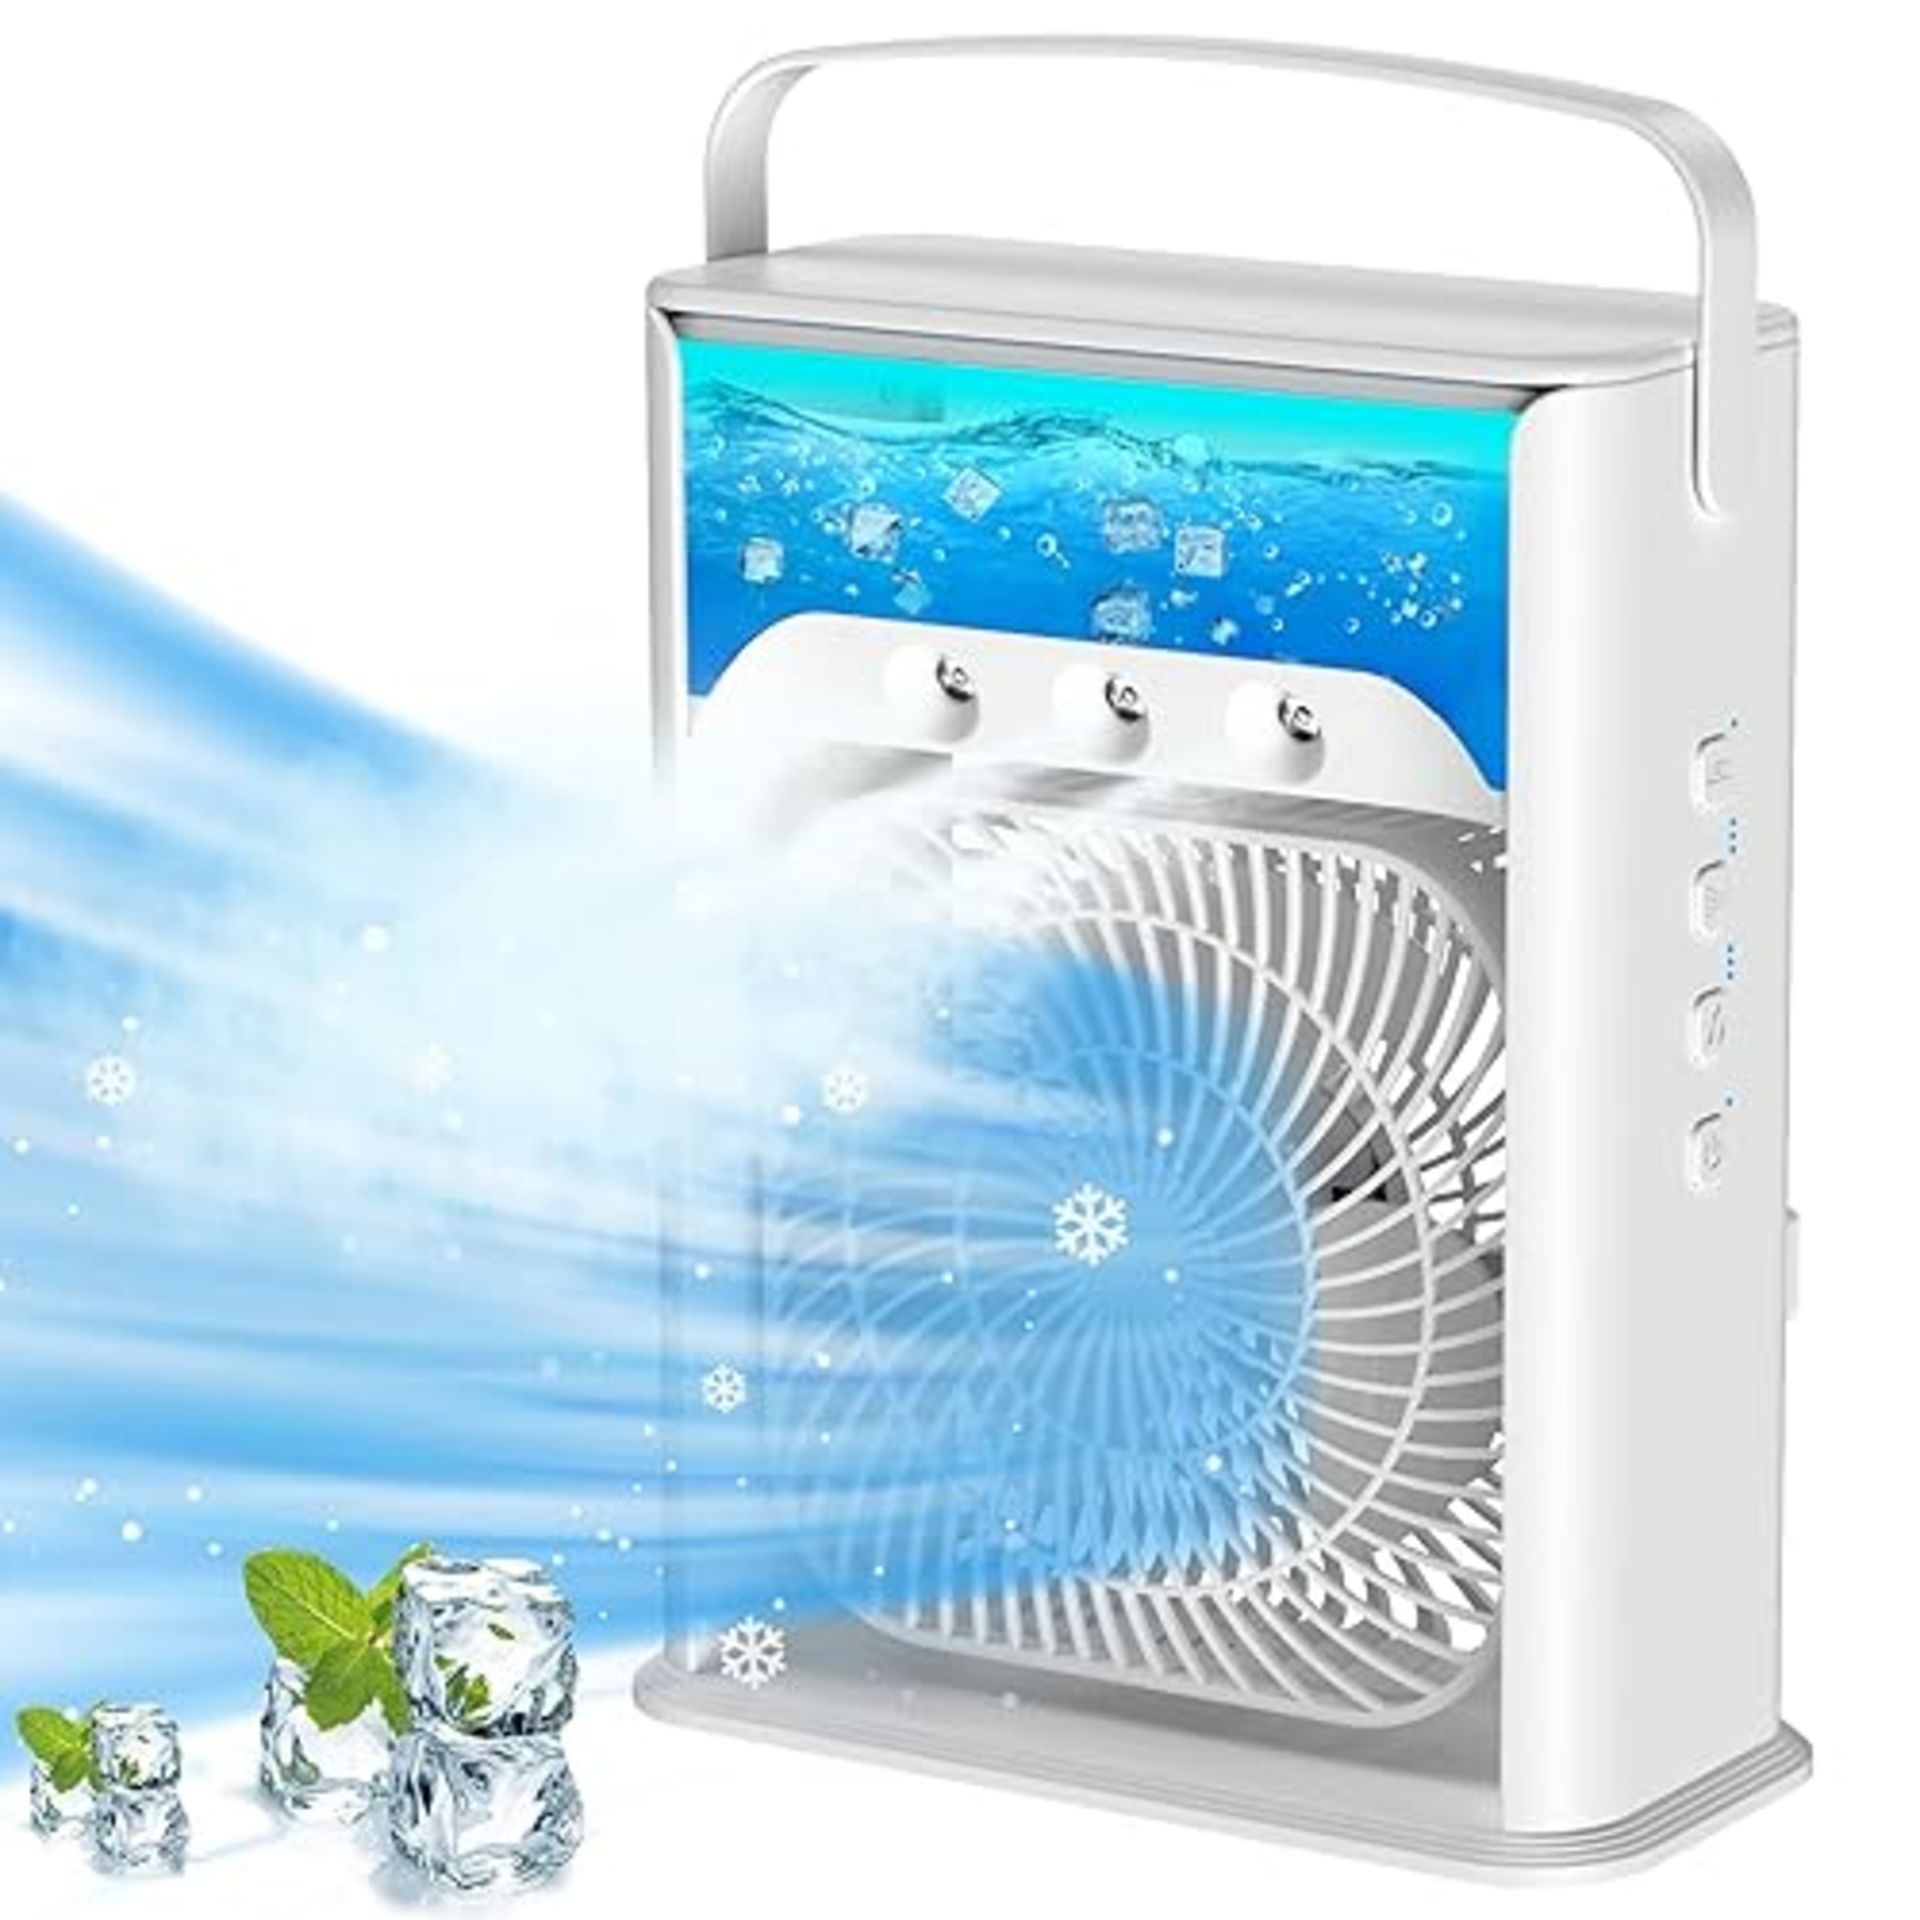 Portable Air Cooler 4-In-1 Mini Mobile Air Conditioner Fan, Air Cooling Fan and Humidifier, 7 Color